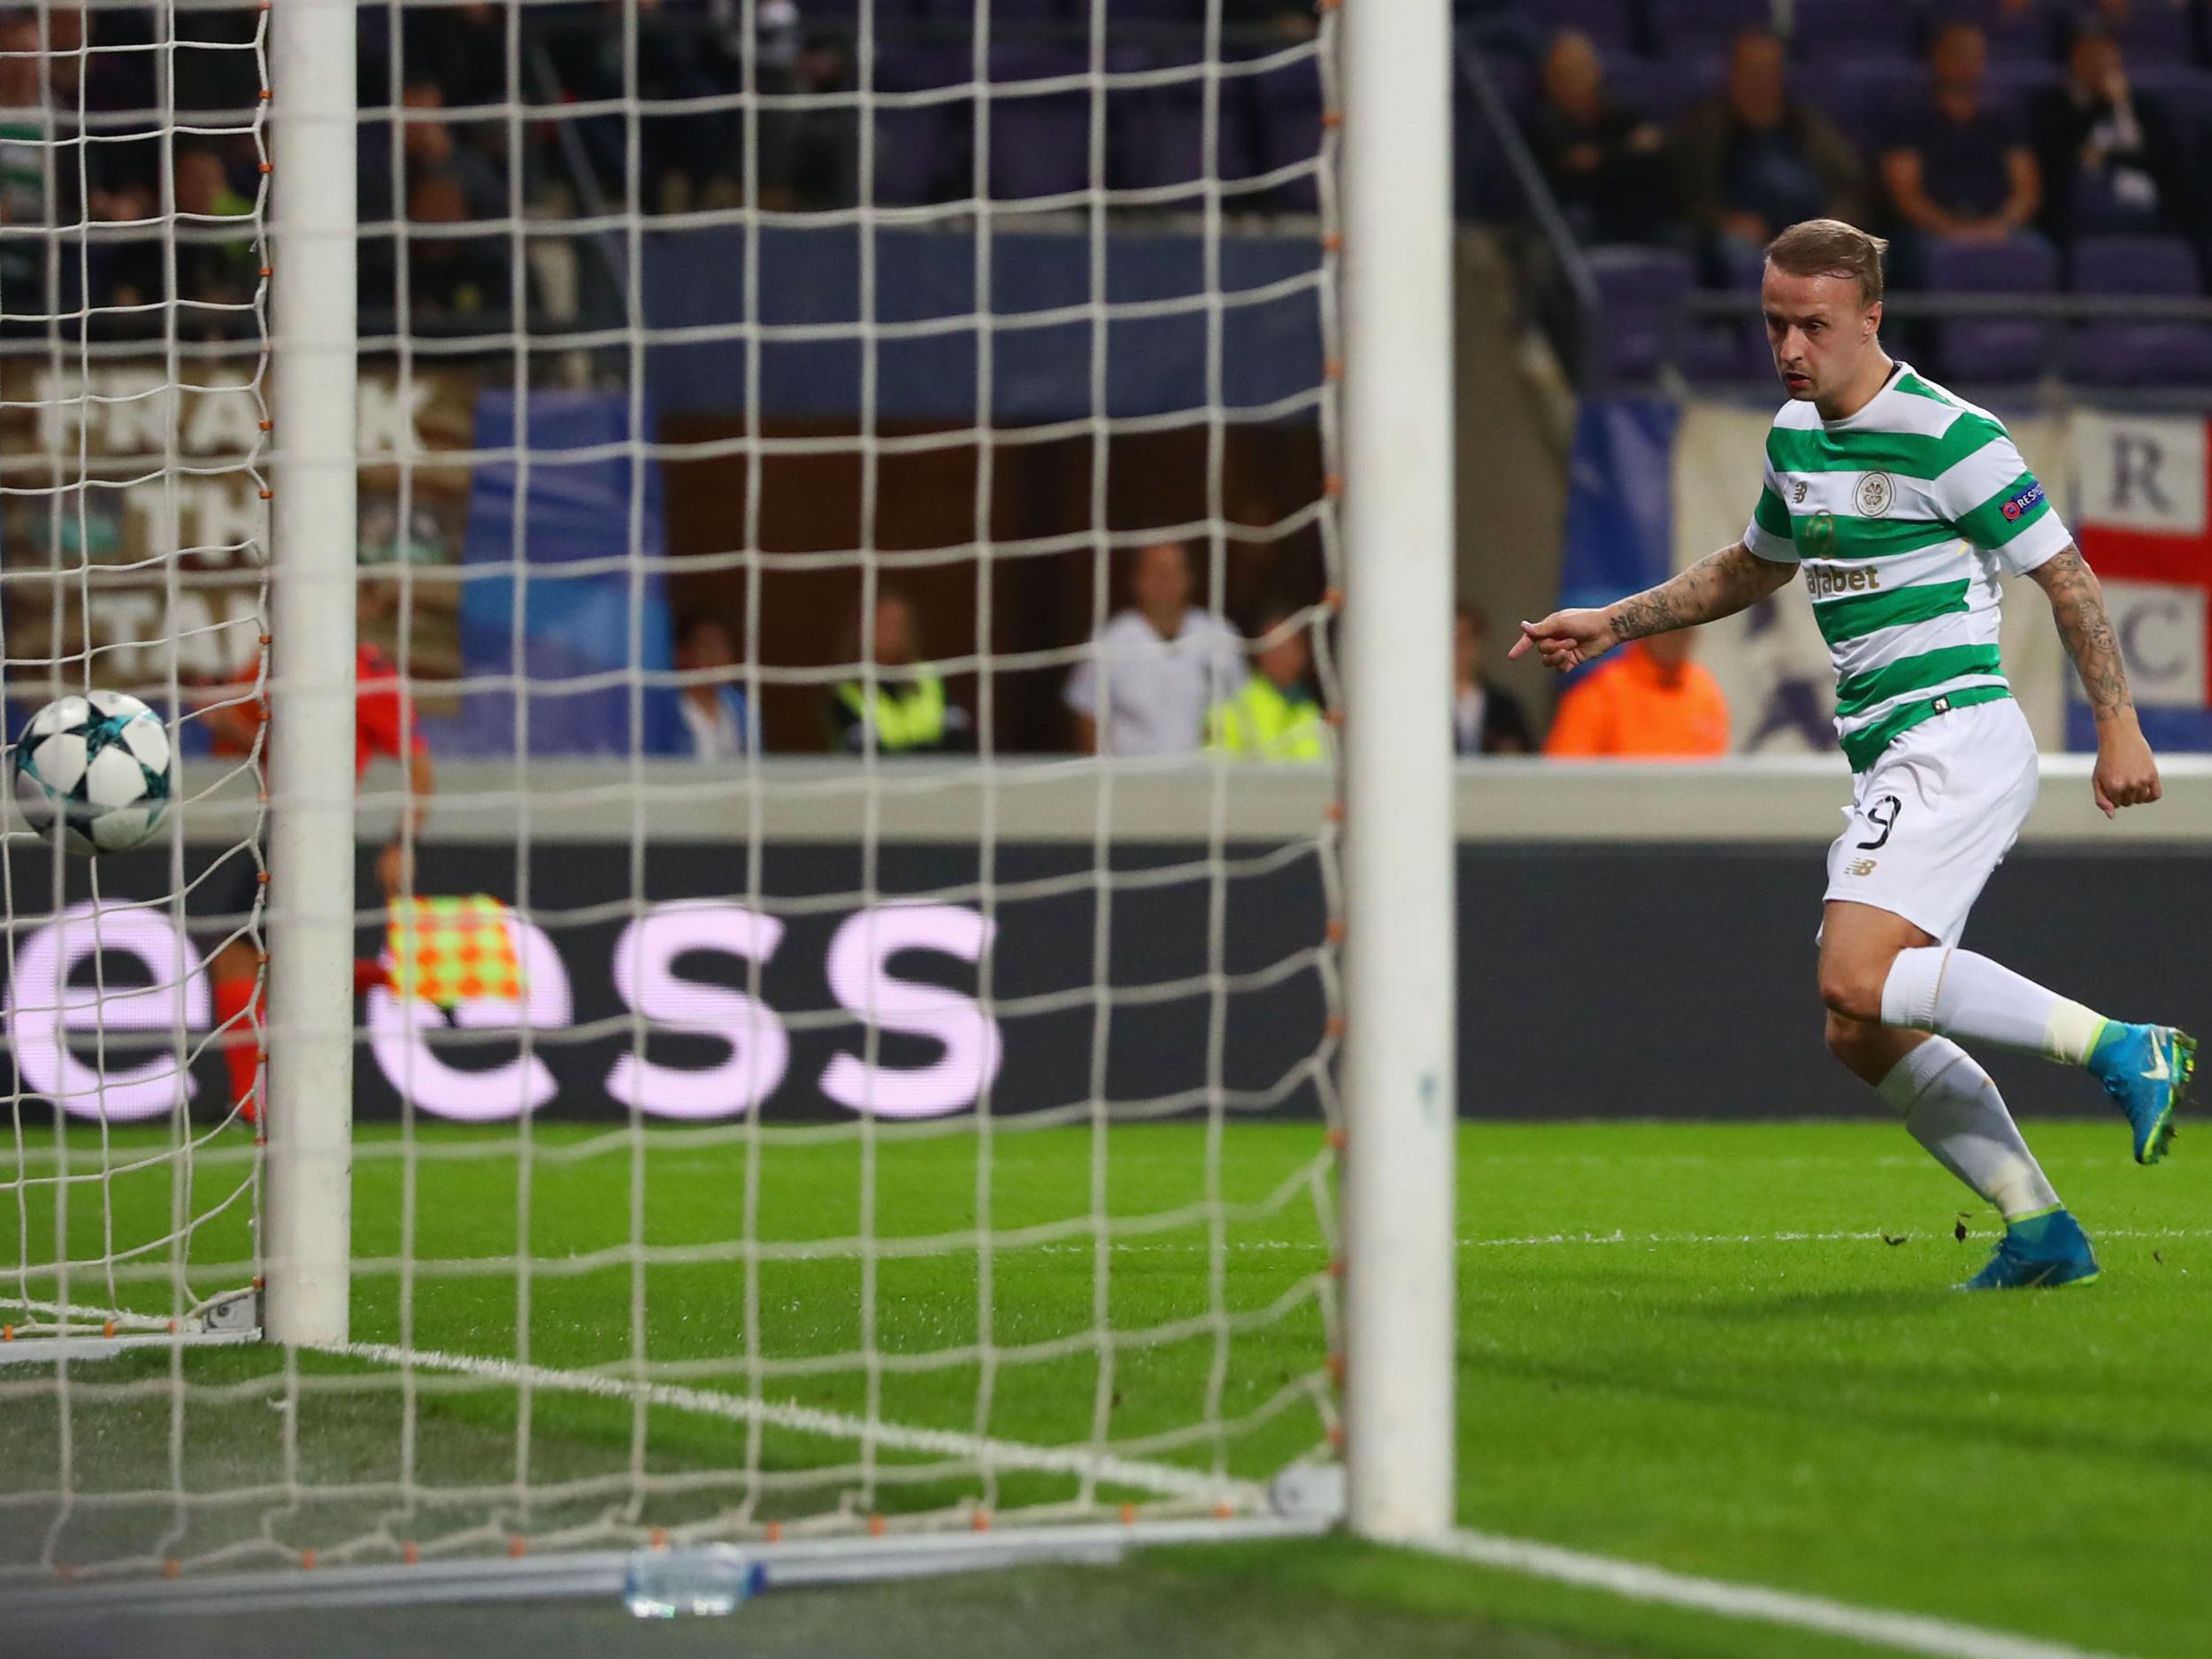 Leigh Griffiths opened the scoring with a poacher's goal